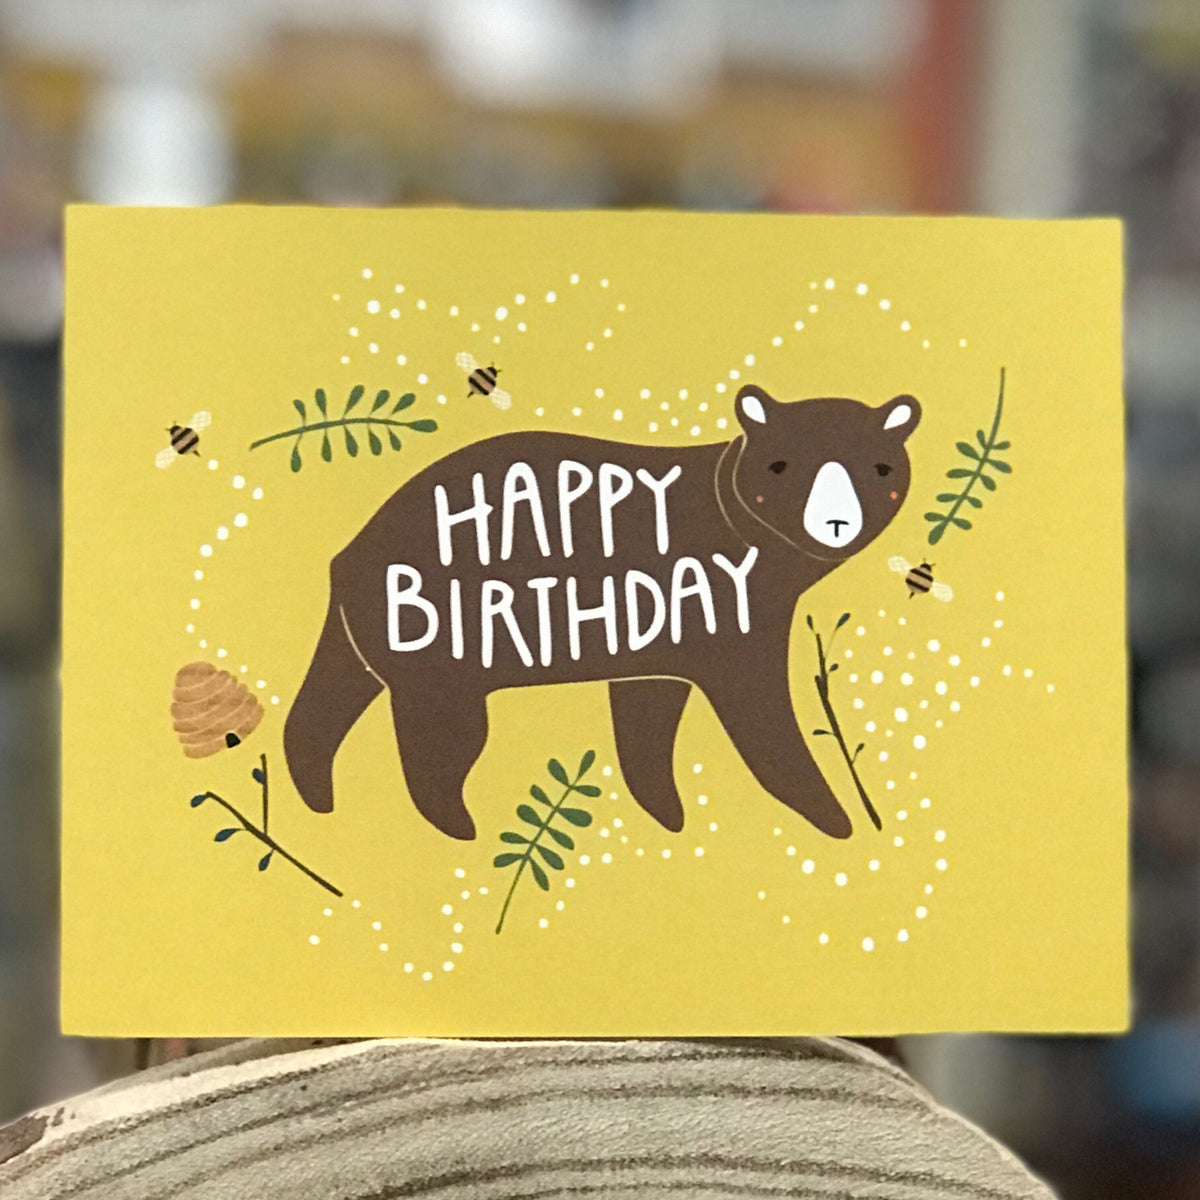 A mustard yellow card shows an image of a brown bear with rosy cheeks. It says &quot;Happy Birthday&quot; across his body. Bees and a hive are in the background along with some greenery. The card is standing on a piece of wood and the background of the shot is blurry. 